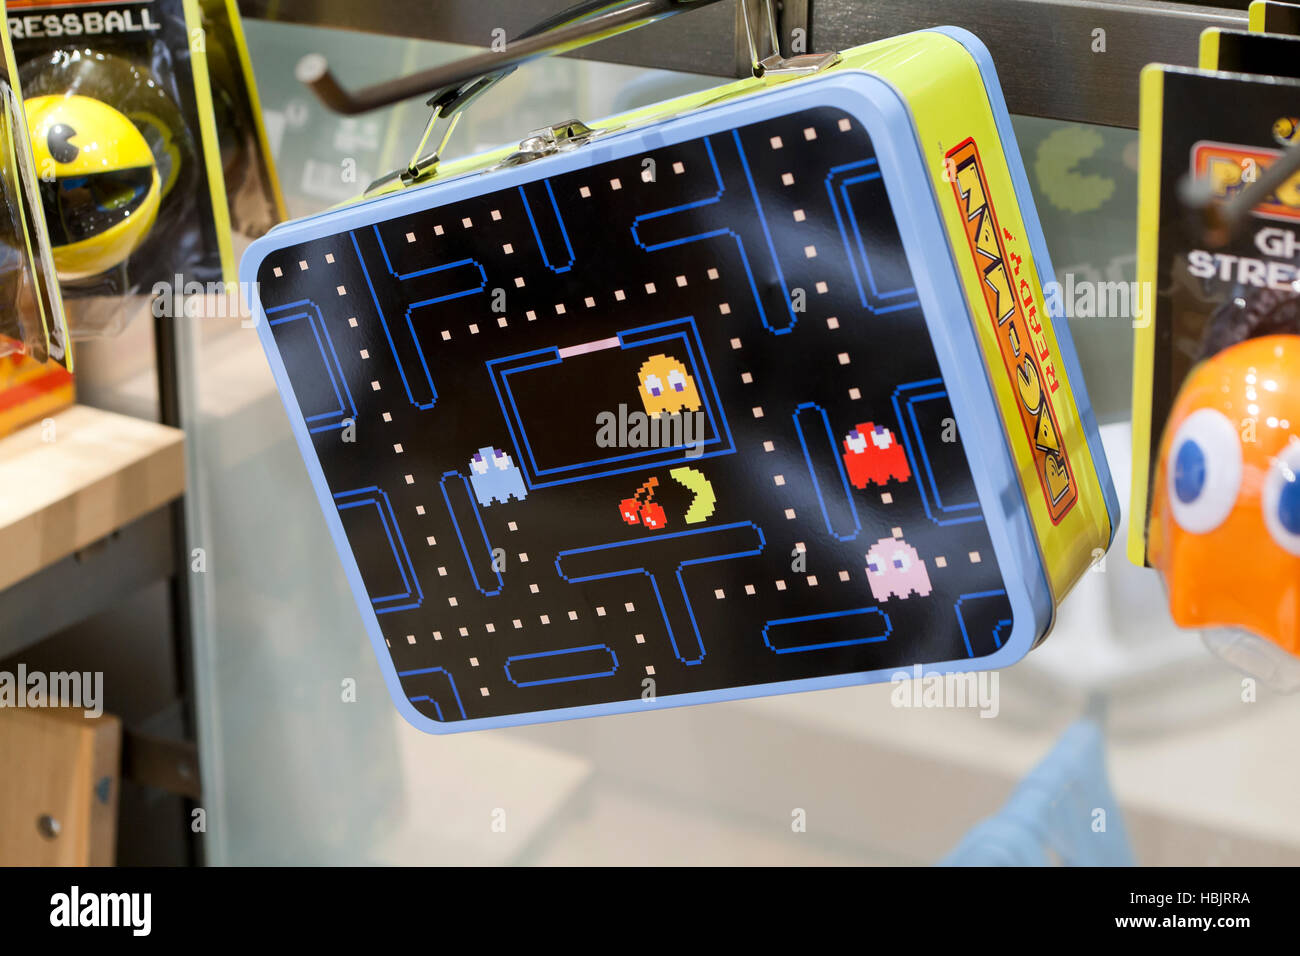 PAC-MAN video game themed lunch box - USA Stock Photo